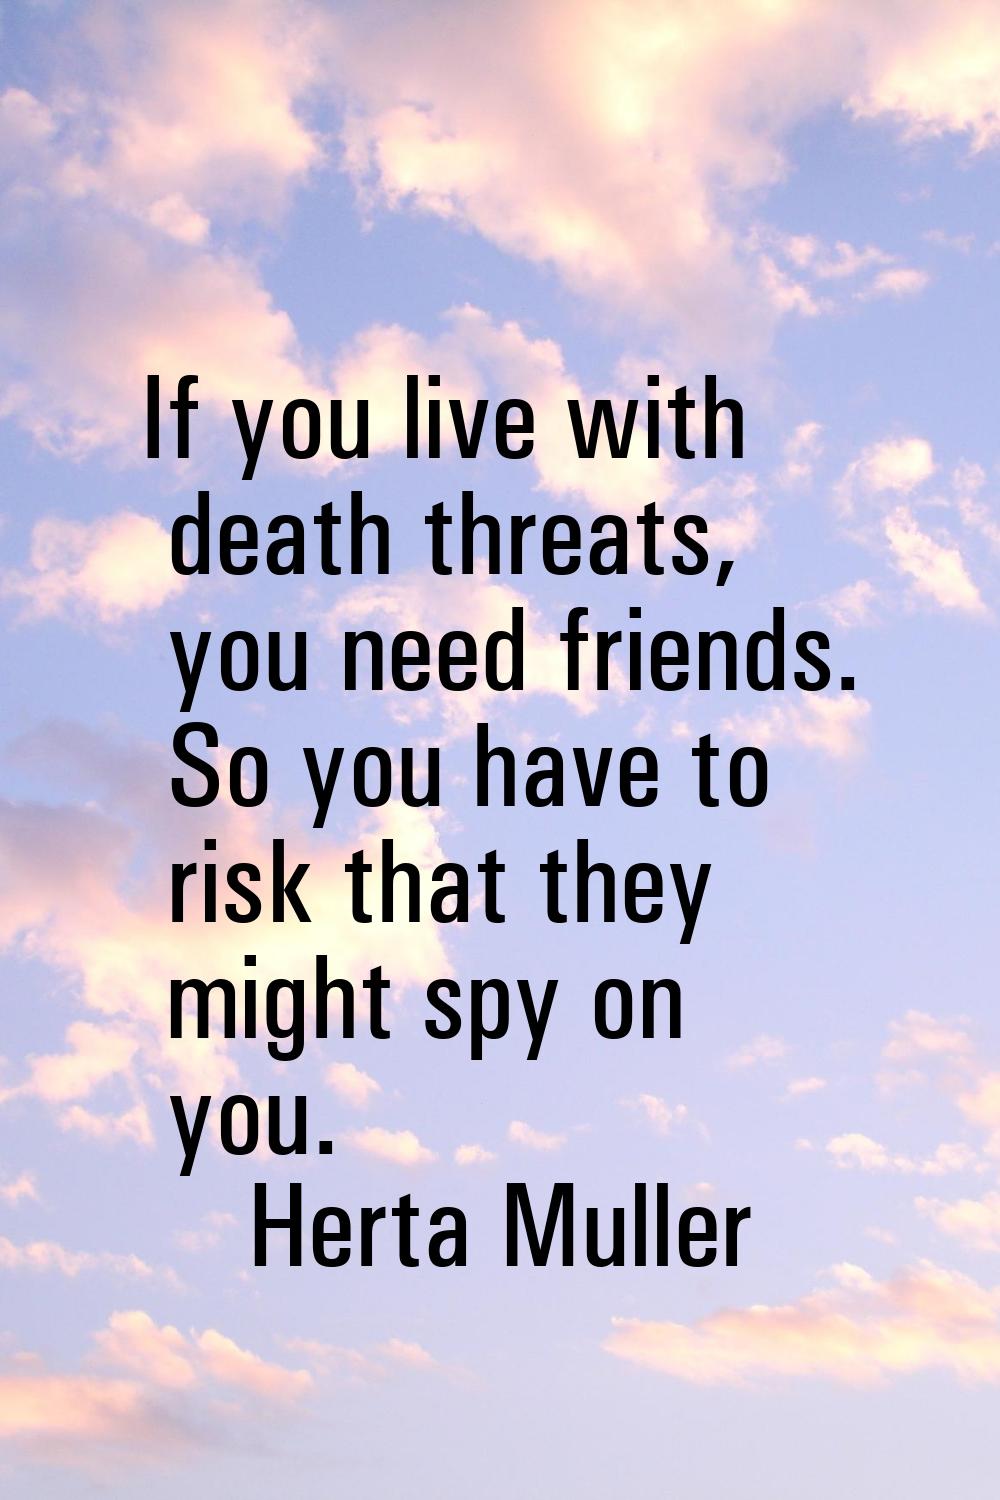 If you live with death threats, you need friends. So you have to risk that they might spy on you.